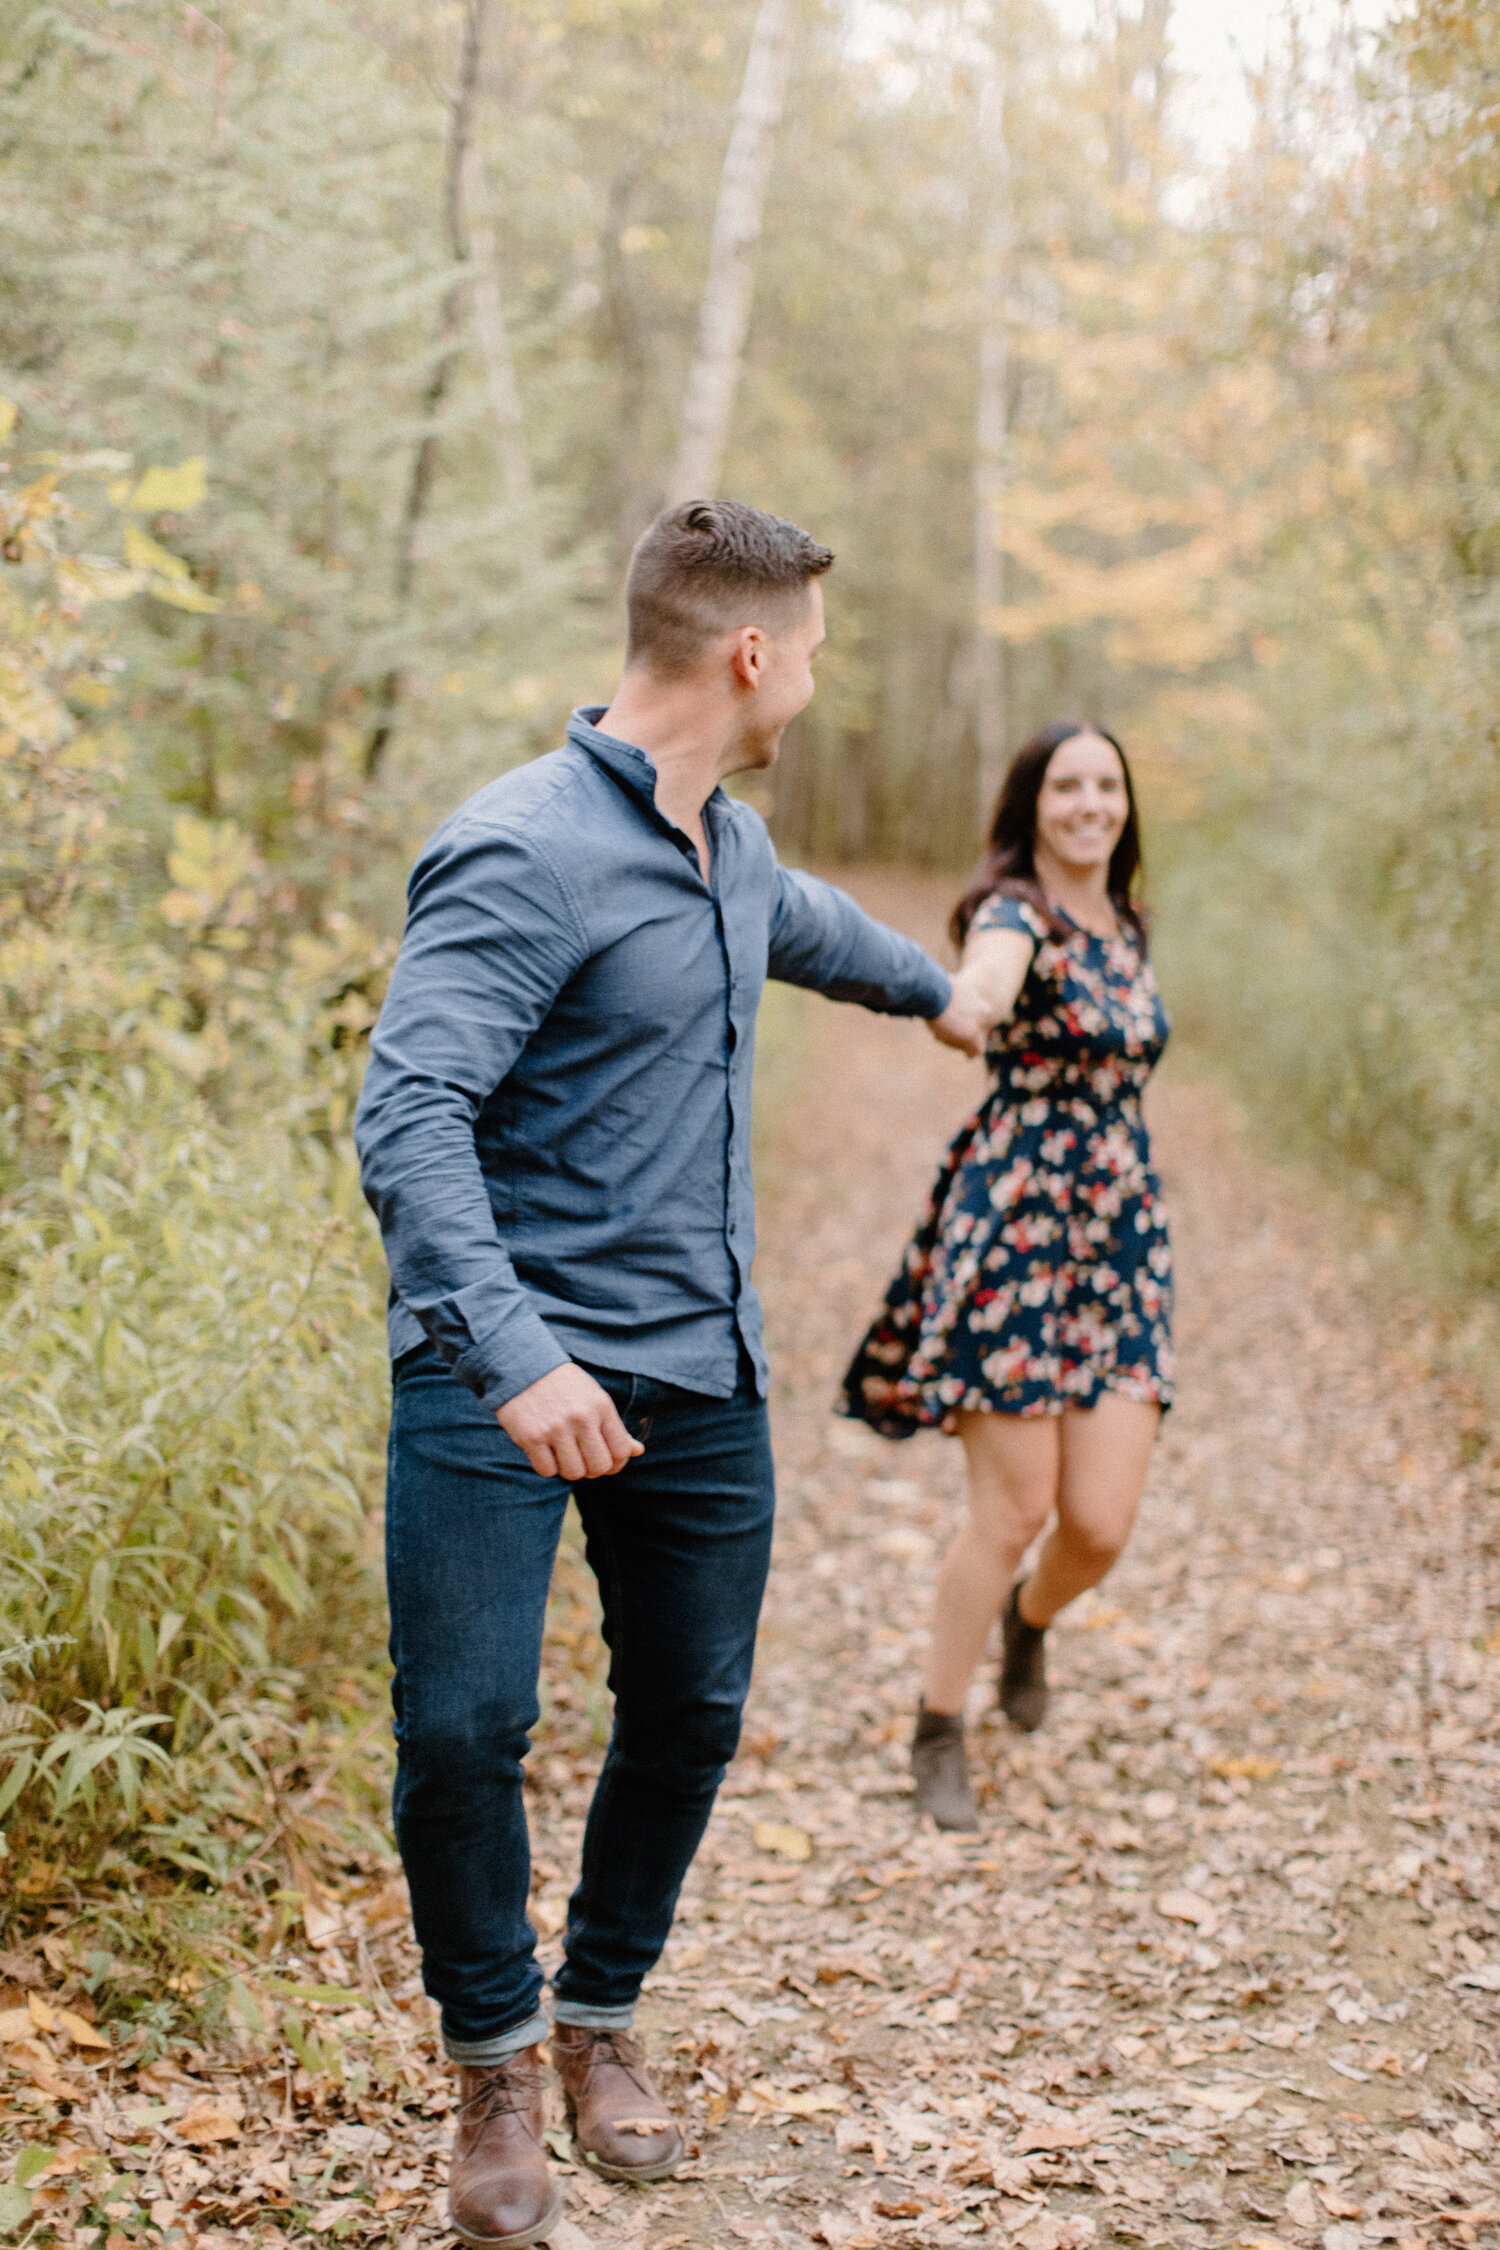  While taking their engagement photos on an unpaved autumn leaf filled path, Chelsea Mason Photography captures this man leading his fiance by the hand in Brockville, Ontario. brockville ontario engagement photographer autumn engagement session women